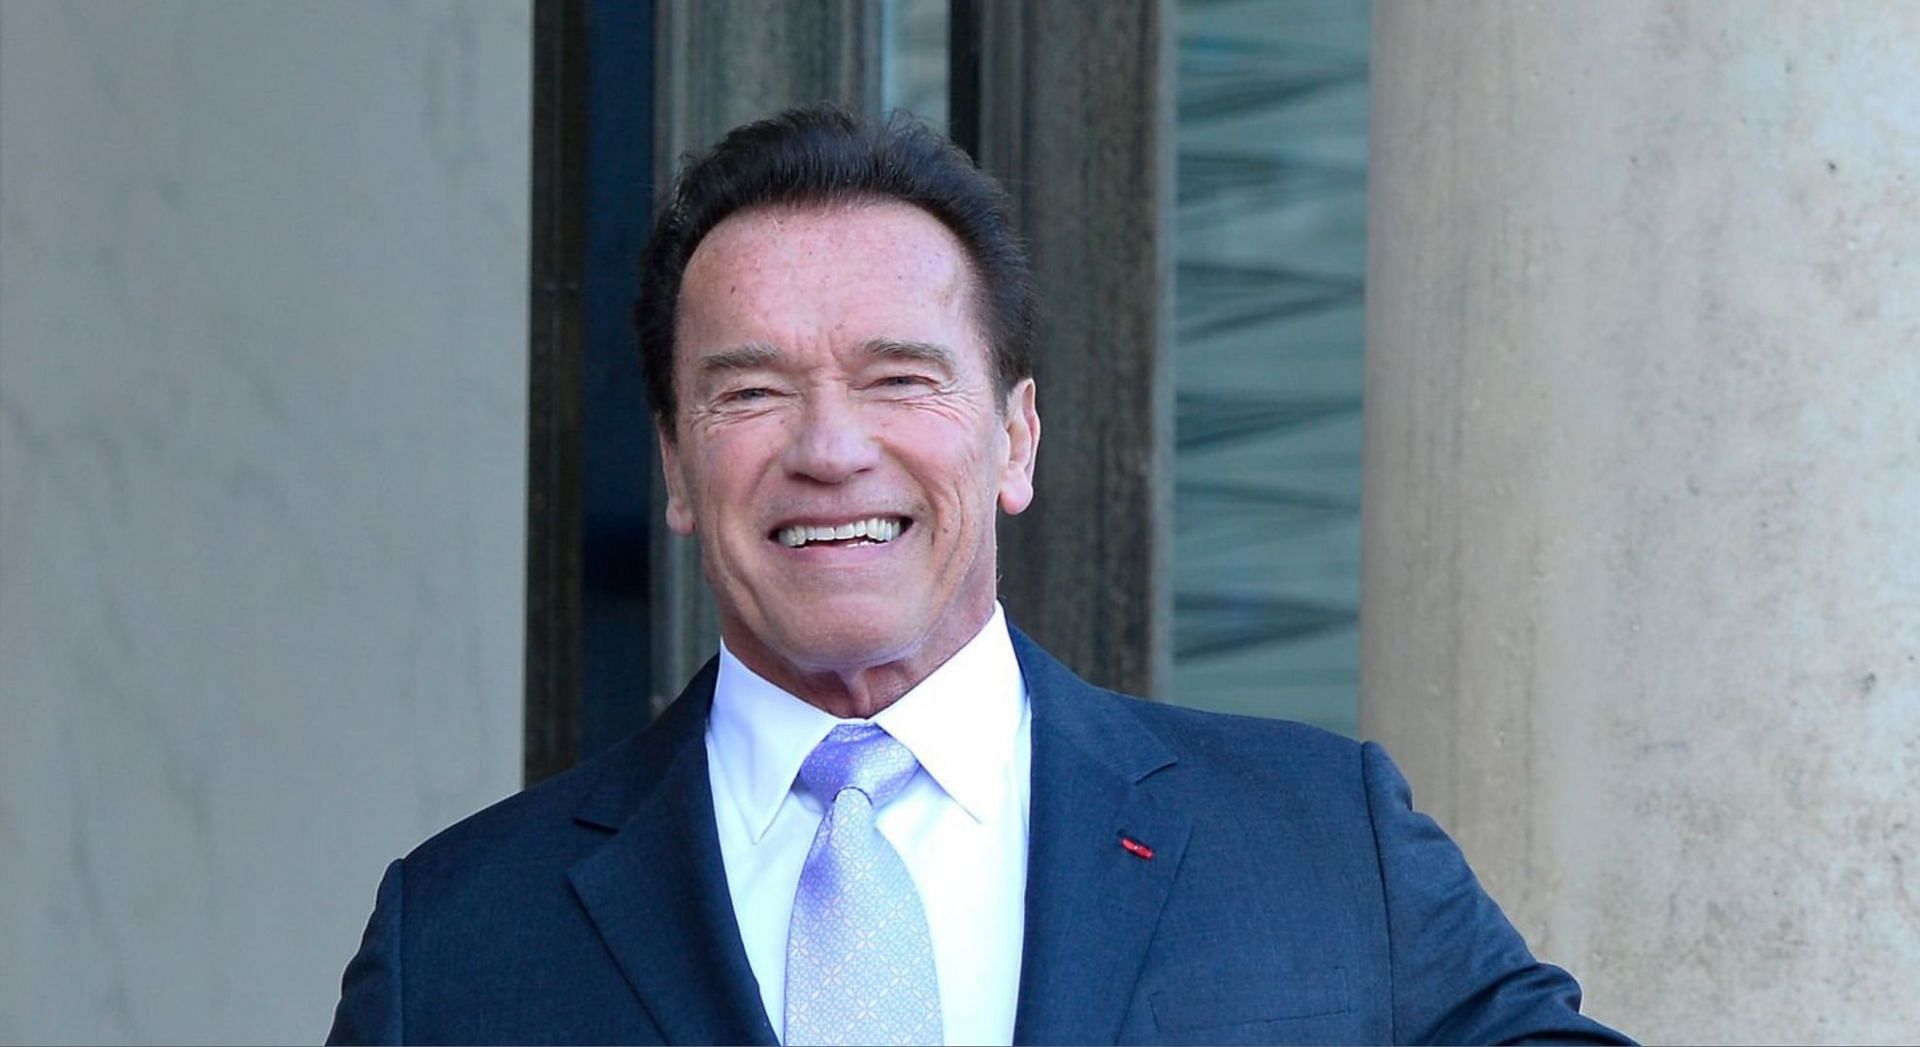 Arnold Schwarzenegger recently shared a moving video message against anti-Semitism and all forms of hate (Image via Getty Images)